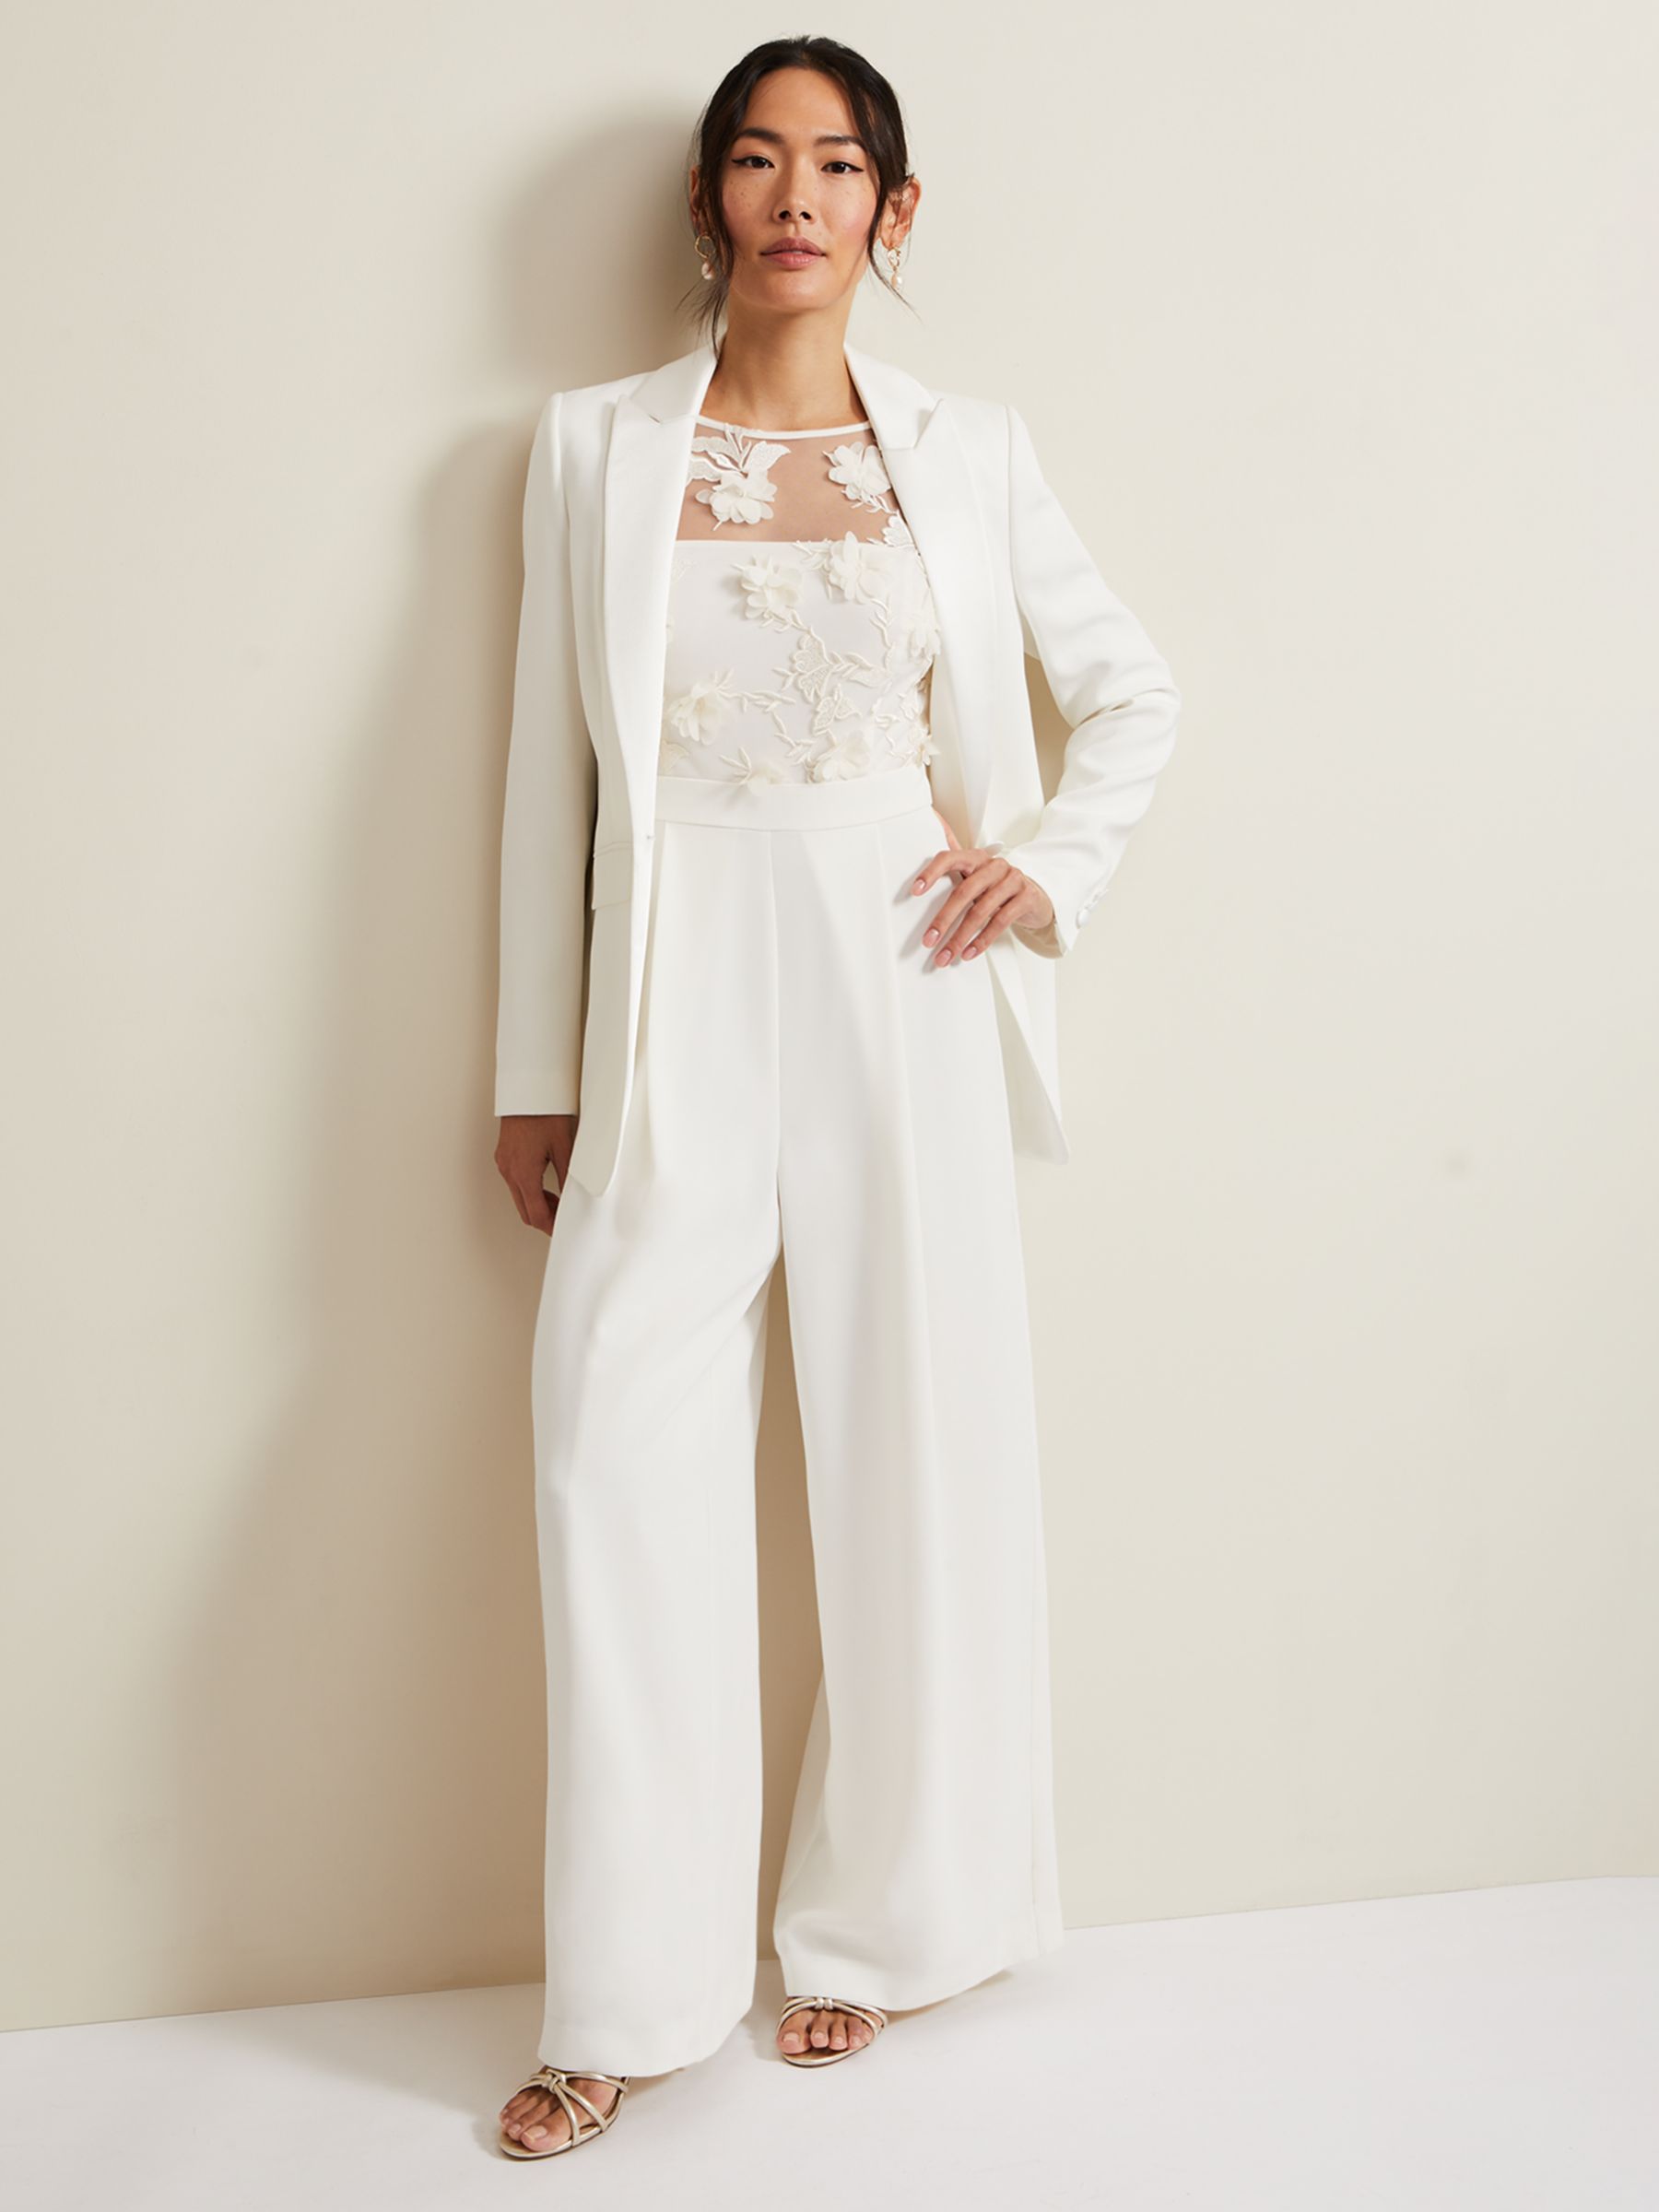 Phase Eight Cherie Bridal Floral Textured Overlay Jumpsuit, Ivory, 8